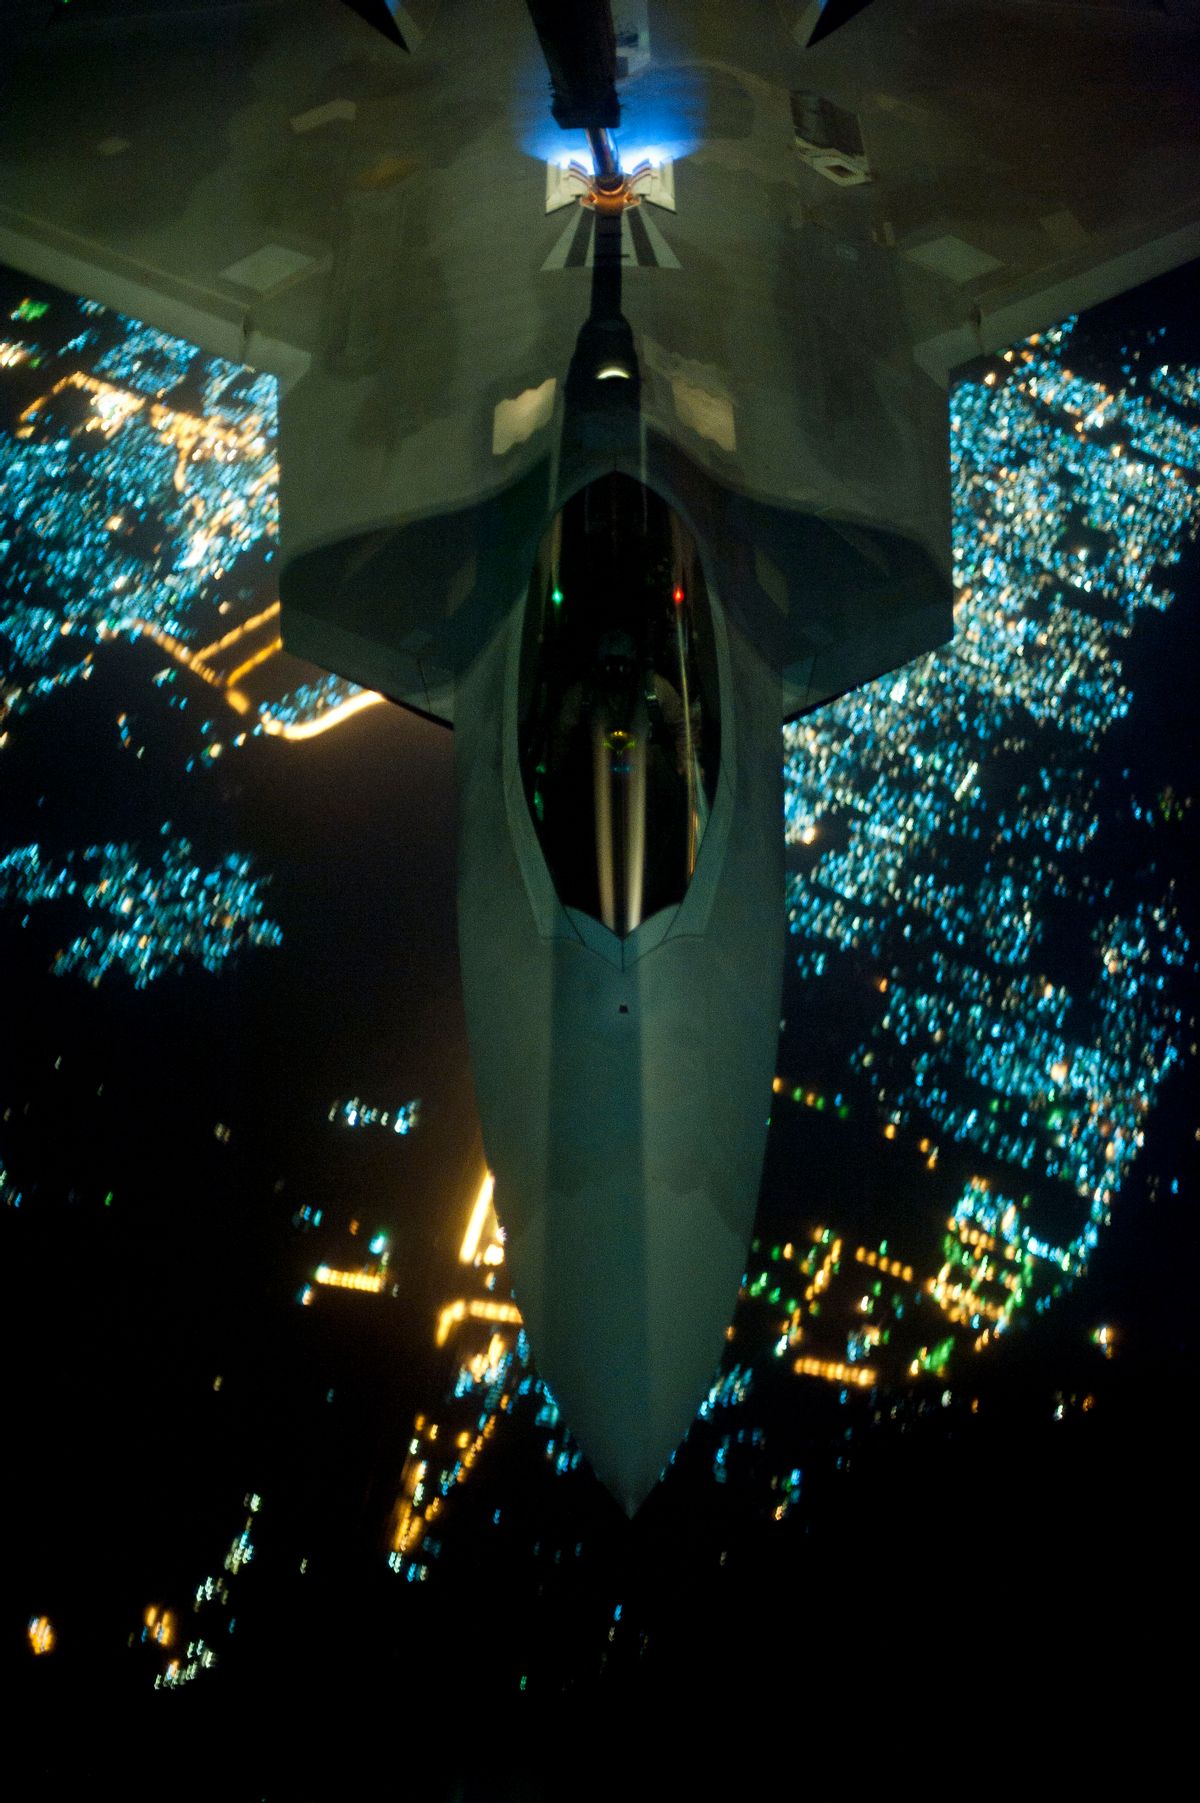 AP10ThingsToSee - In this Friday, Sept. 26, 2014 photo, released by the U.S. Air Force, a U.S Air Force KC-10 Extender refuels an F-22 Raptor fighter aircraft prior to strike operations in Syria. The F-22s, making their combat debut, were part of a strike package that was engaging Islamic State group targets in Syria. Washington and its Arab allies opened the air assault against the extremist group on Sept. 23, striking military facilities, training camps, heavy weapons and oil installations. The campaign expands upon the airstrikes the United States has been conducting against the militants in Iraq since early August. (AP Photo/U.S. Air Force, Russ Scalf ) (AP)